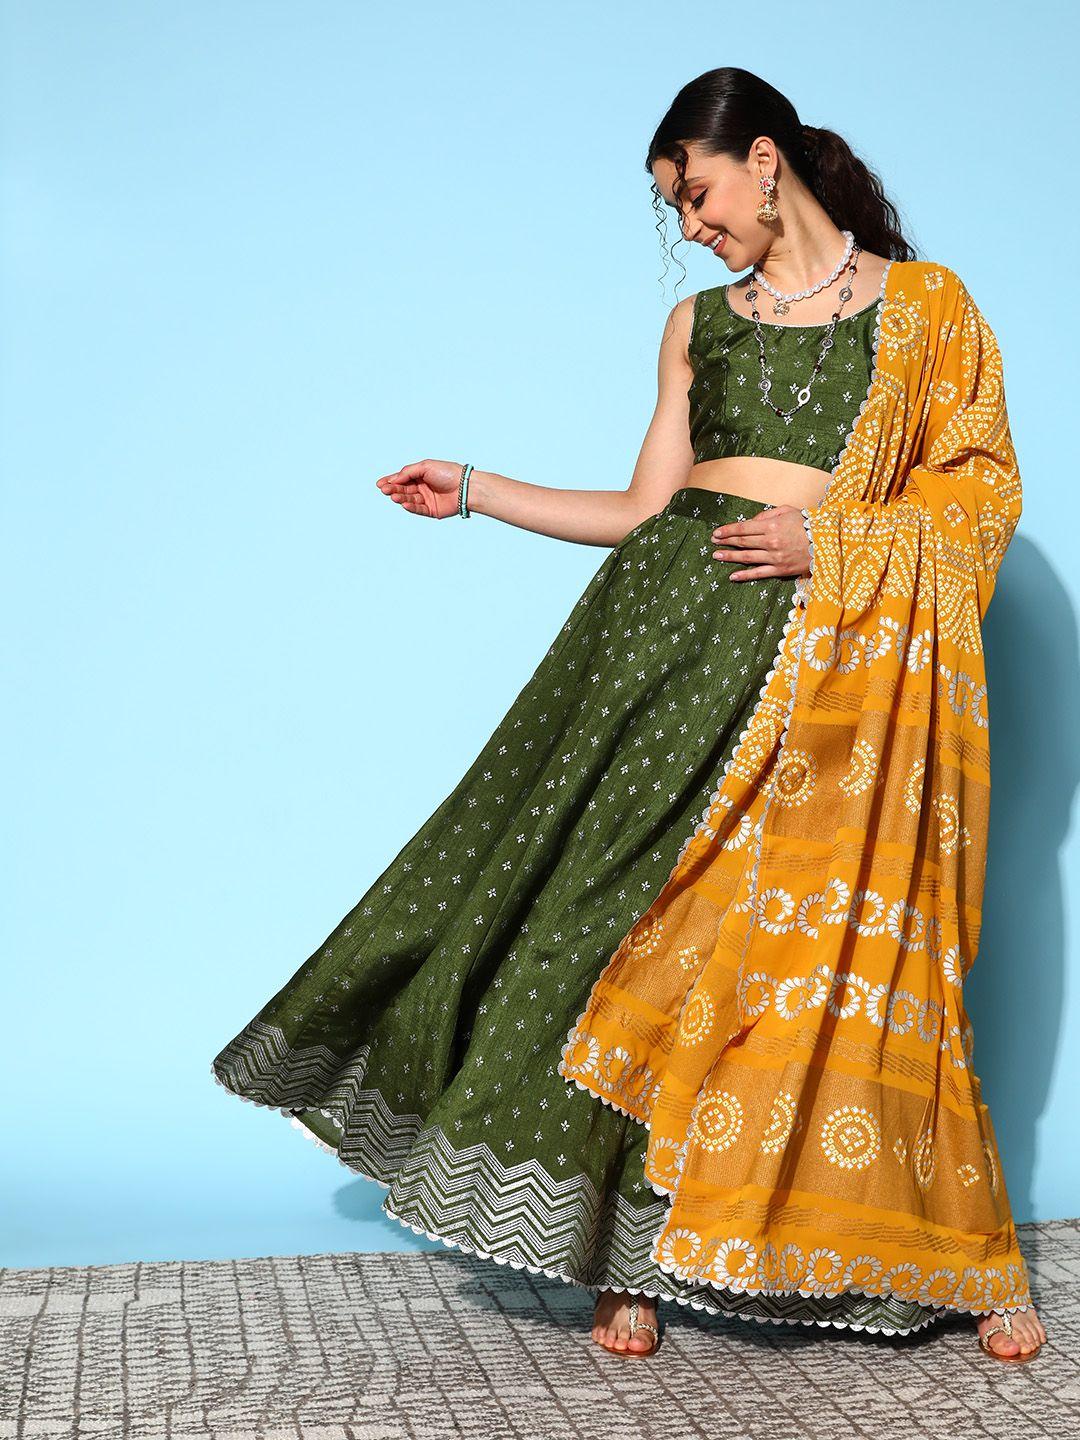 ahalyaa olive green & silver-toned printed ready to wear lehenga & blouse with dupatta